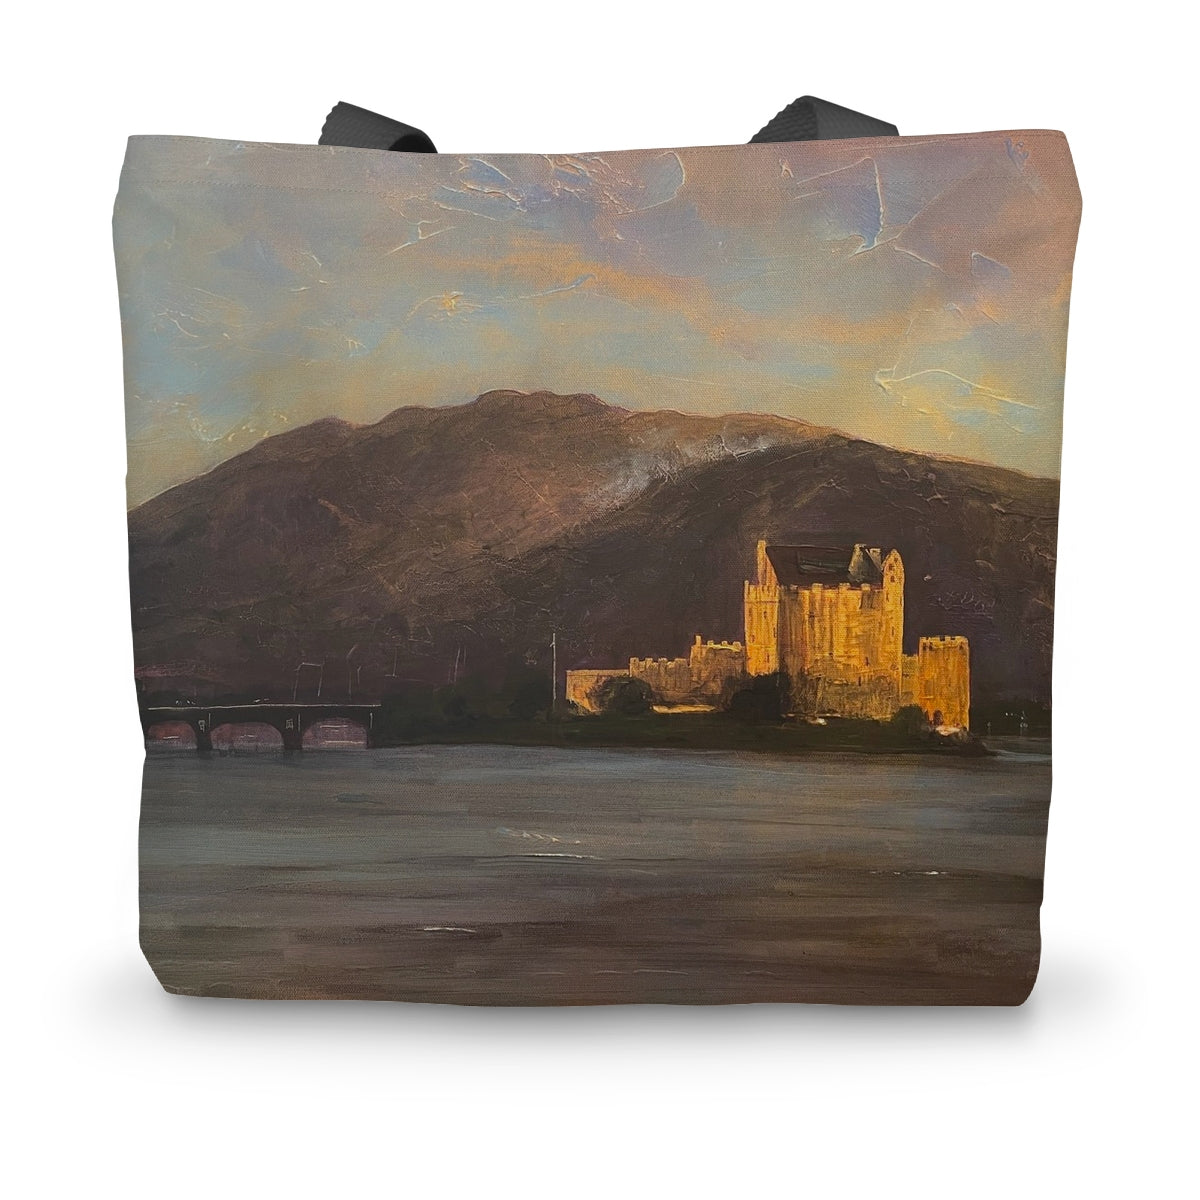 Eilean Donan Castle Art Gifts Canvas Tote Bag-Bags-Historic & Iconic Scotland Art Gallery-14"x18.5"-Paintings, Prints, Homeware, Art Gifts From Scotland By Scottish Artist Kevin Hunter